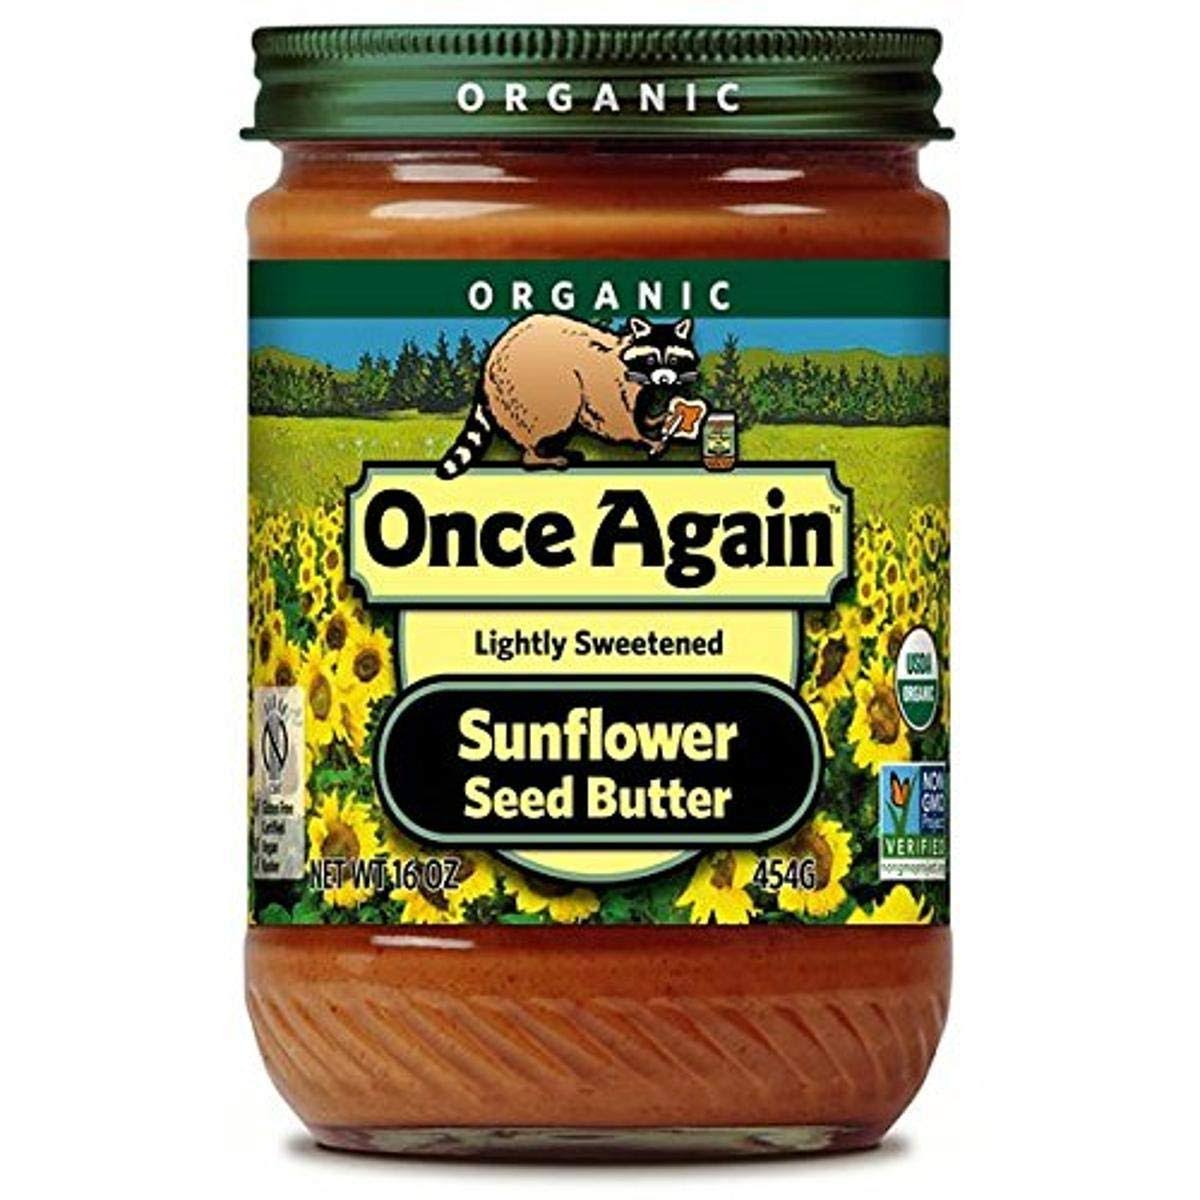 Once Again: Organic Sunflower Seed Butter, 16 Oz